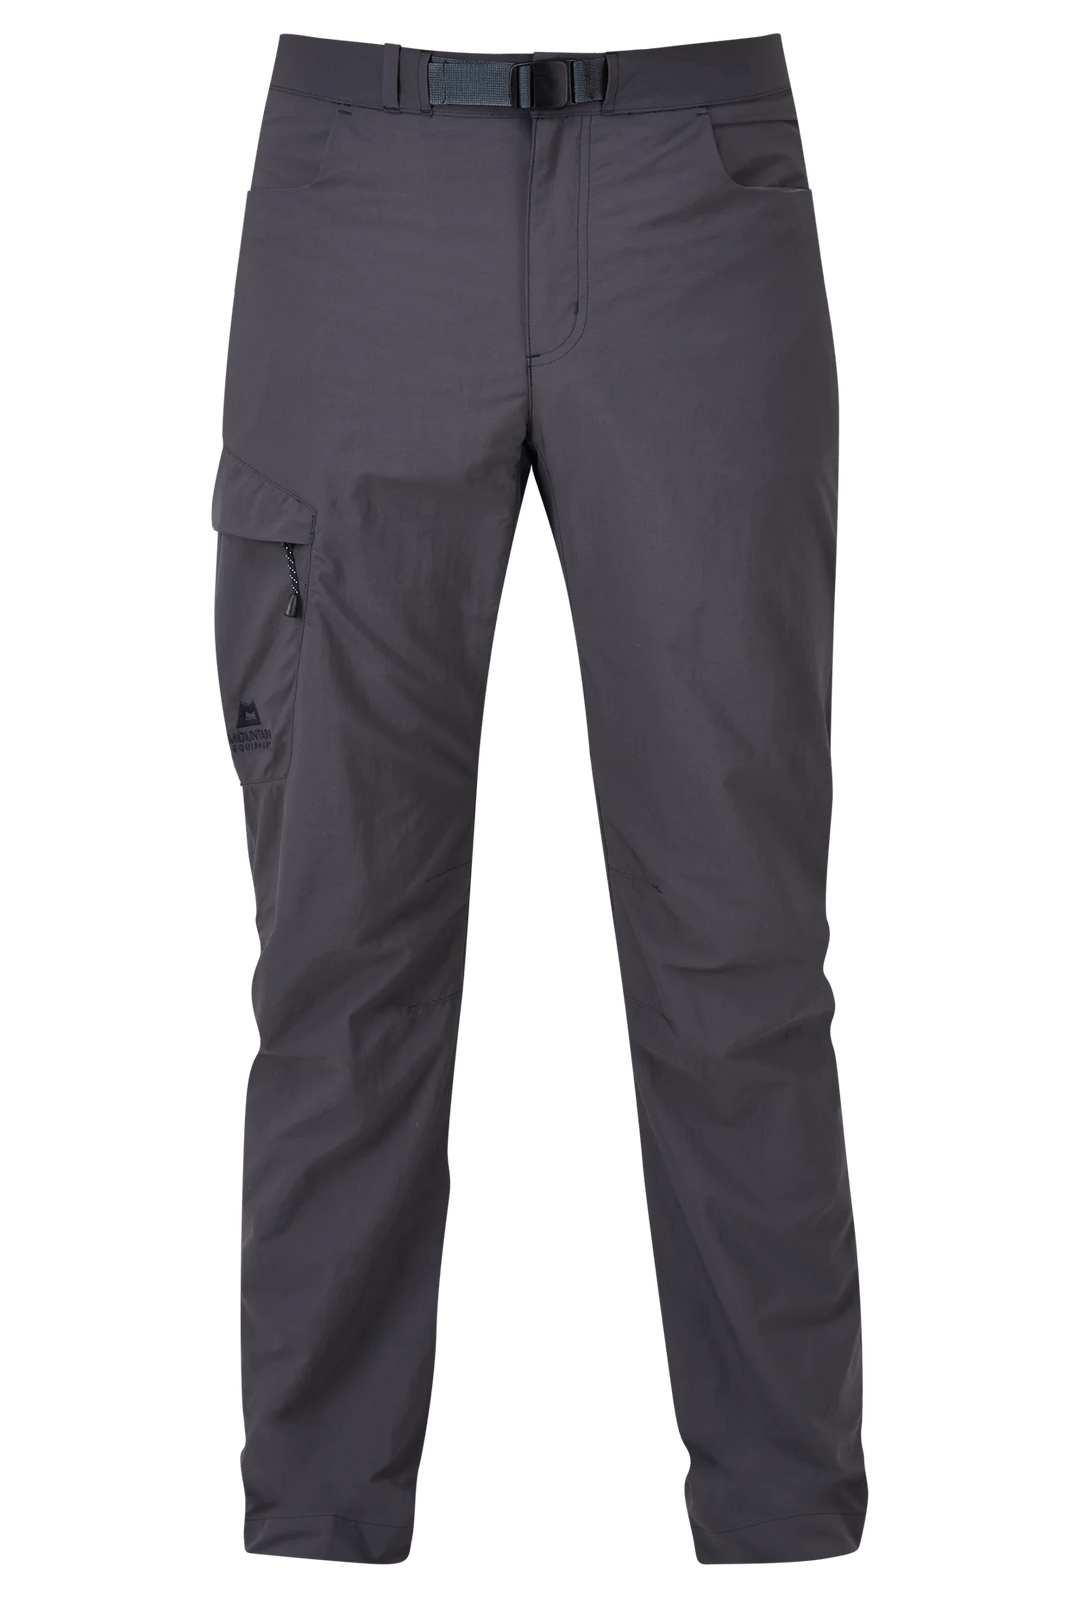 Dihedral Women's Pant